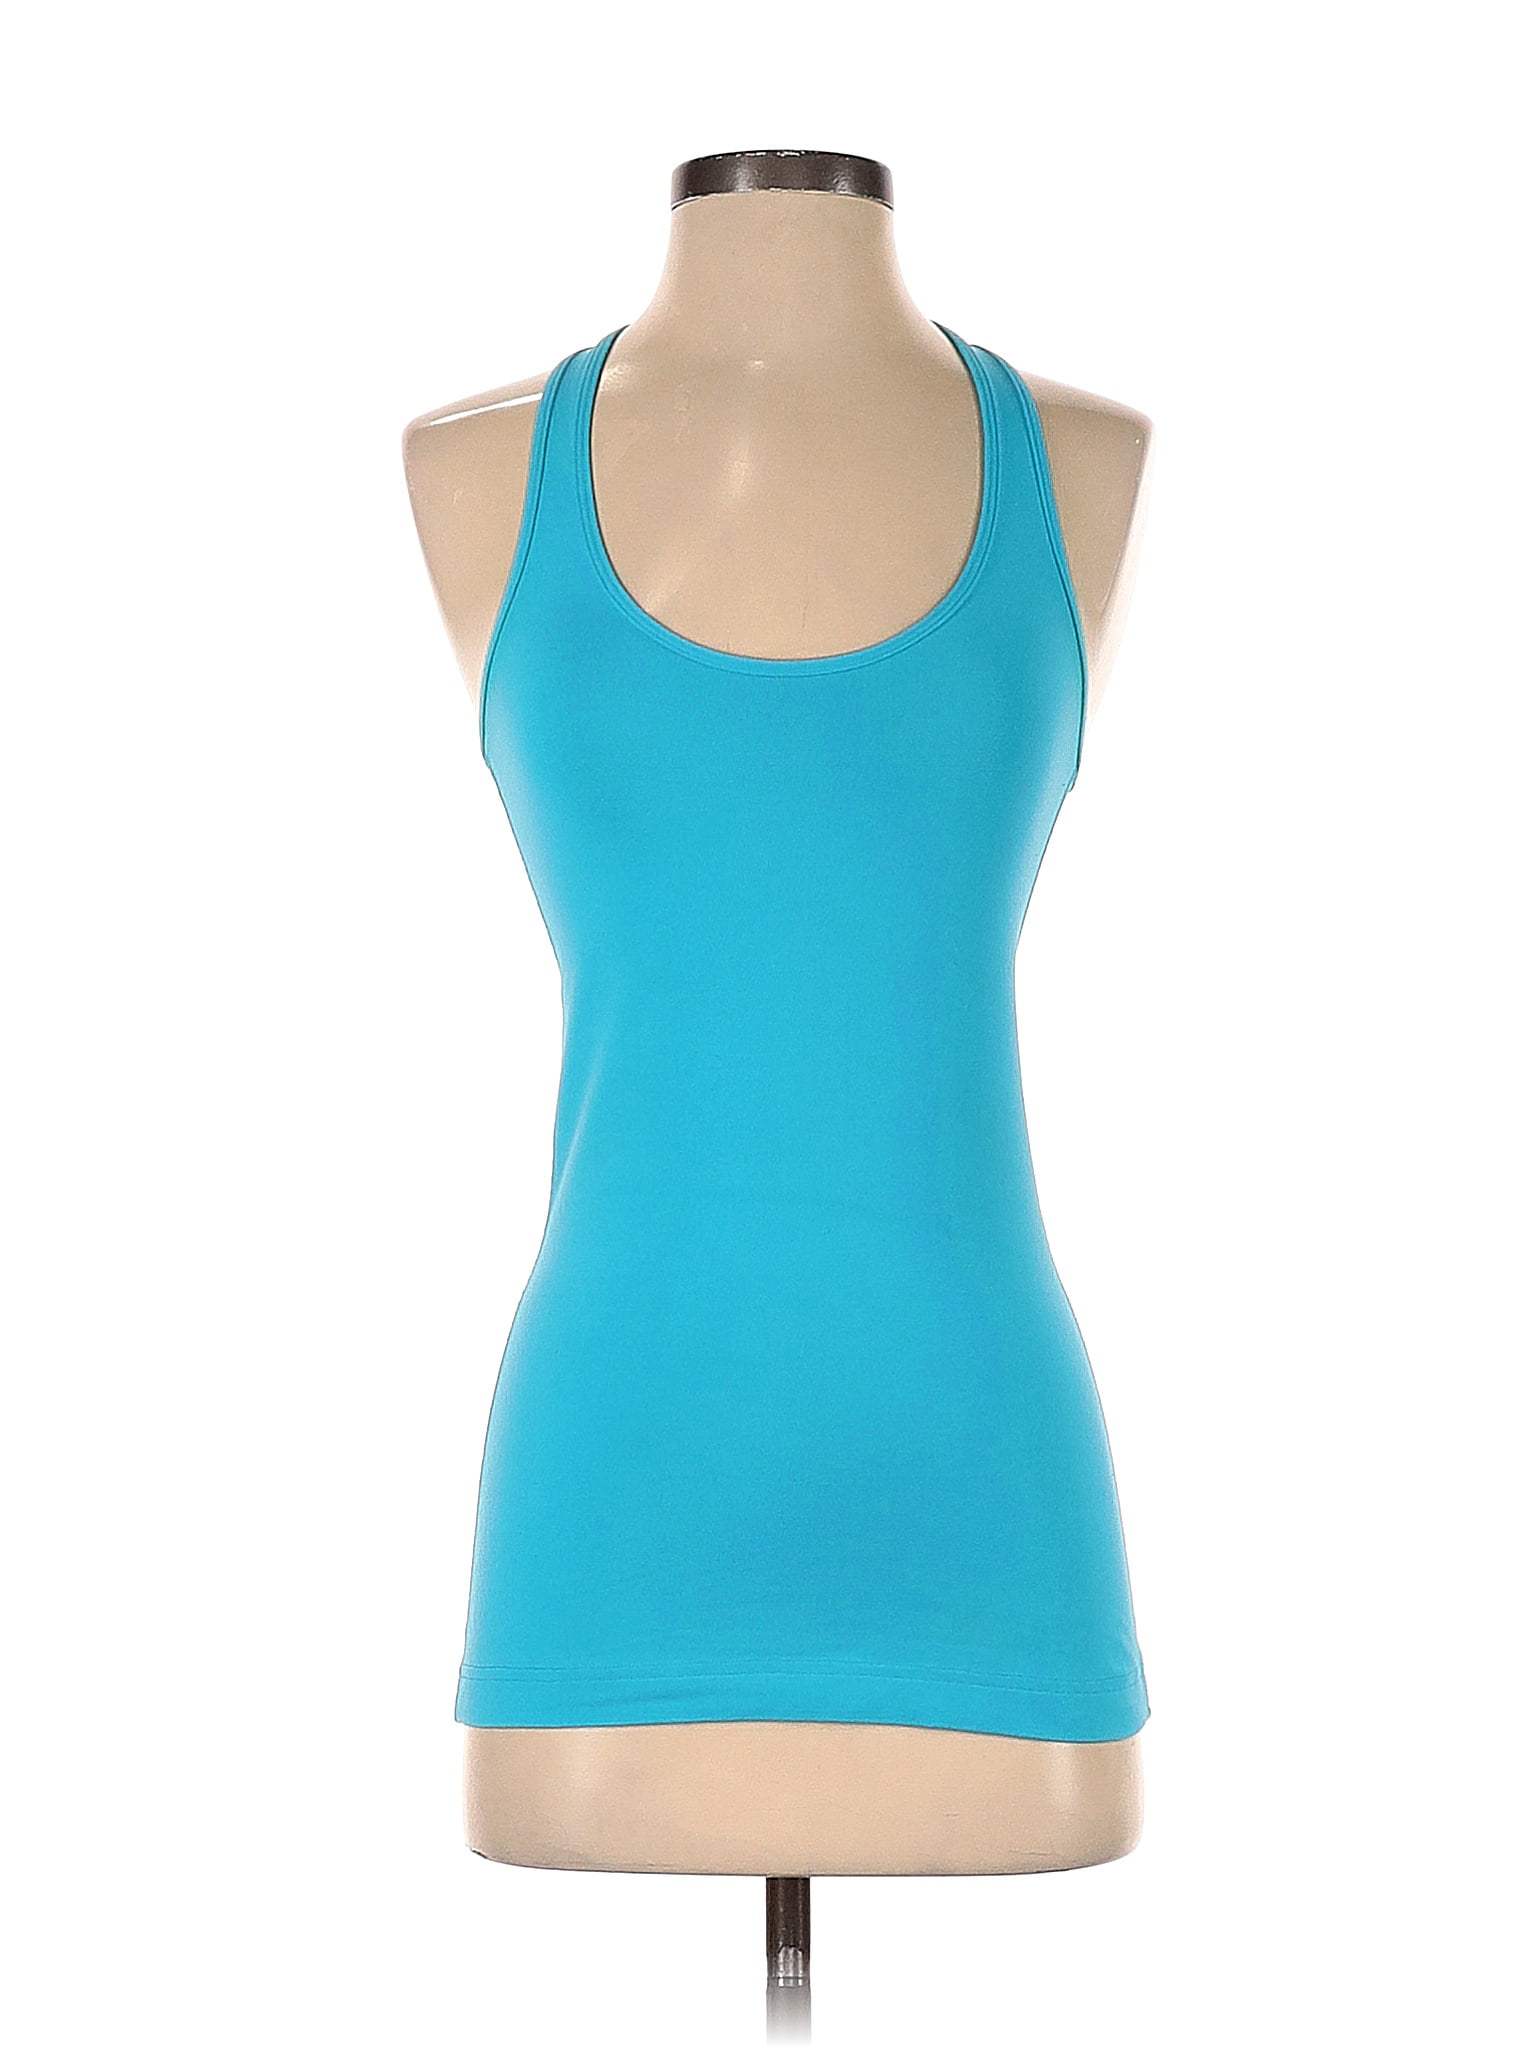 Pre-Owned Lululemon Athletica Womens Size 4 Active Palestine